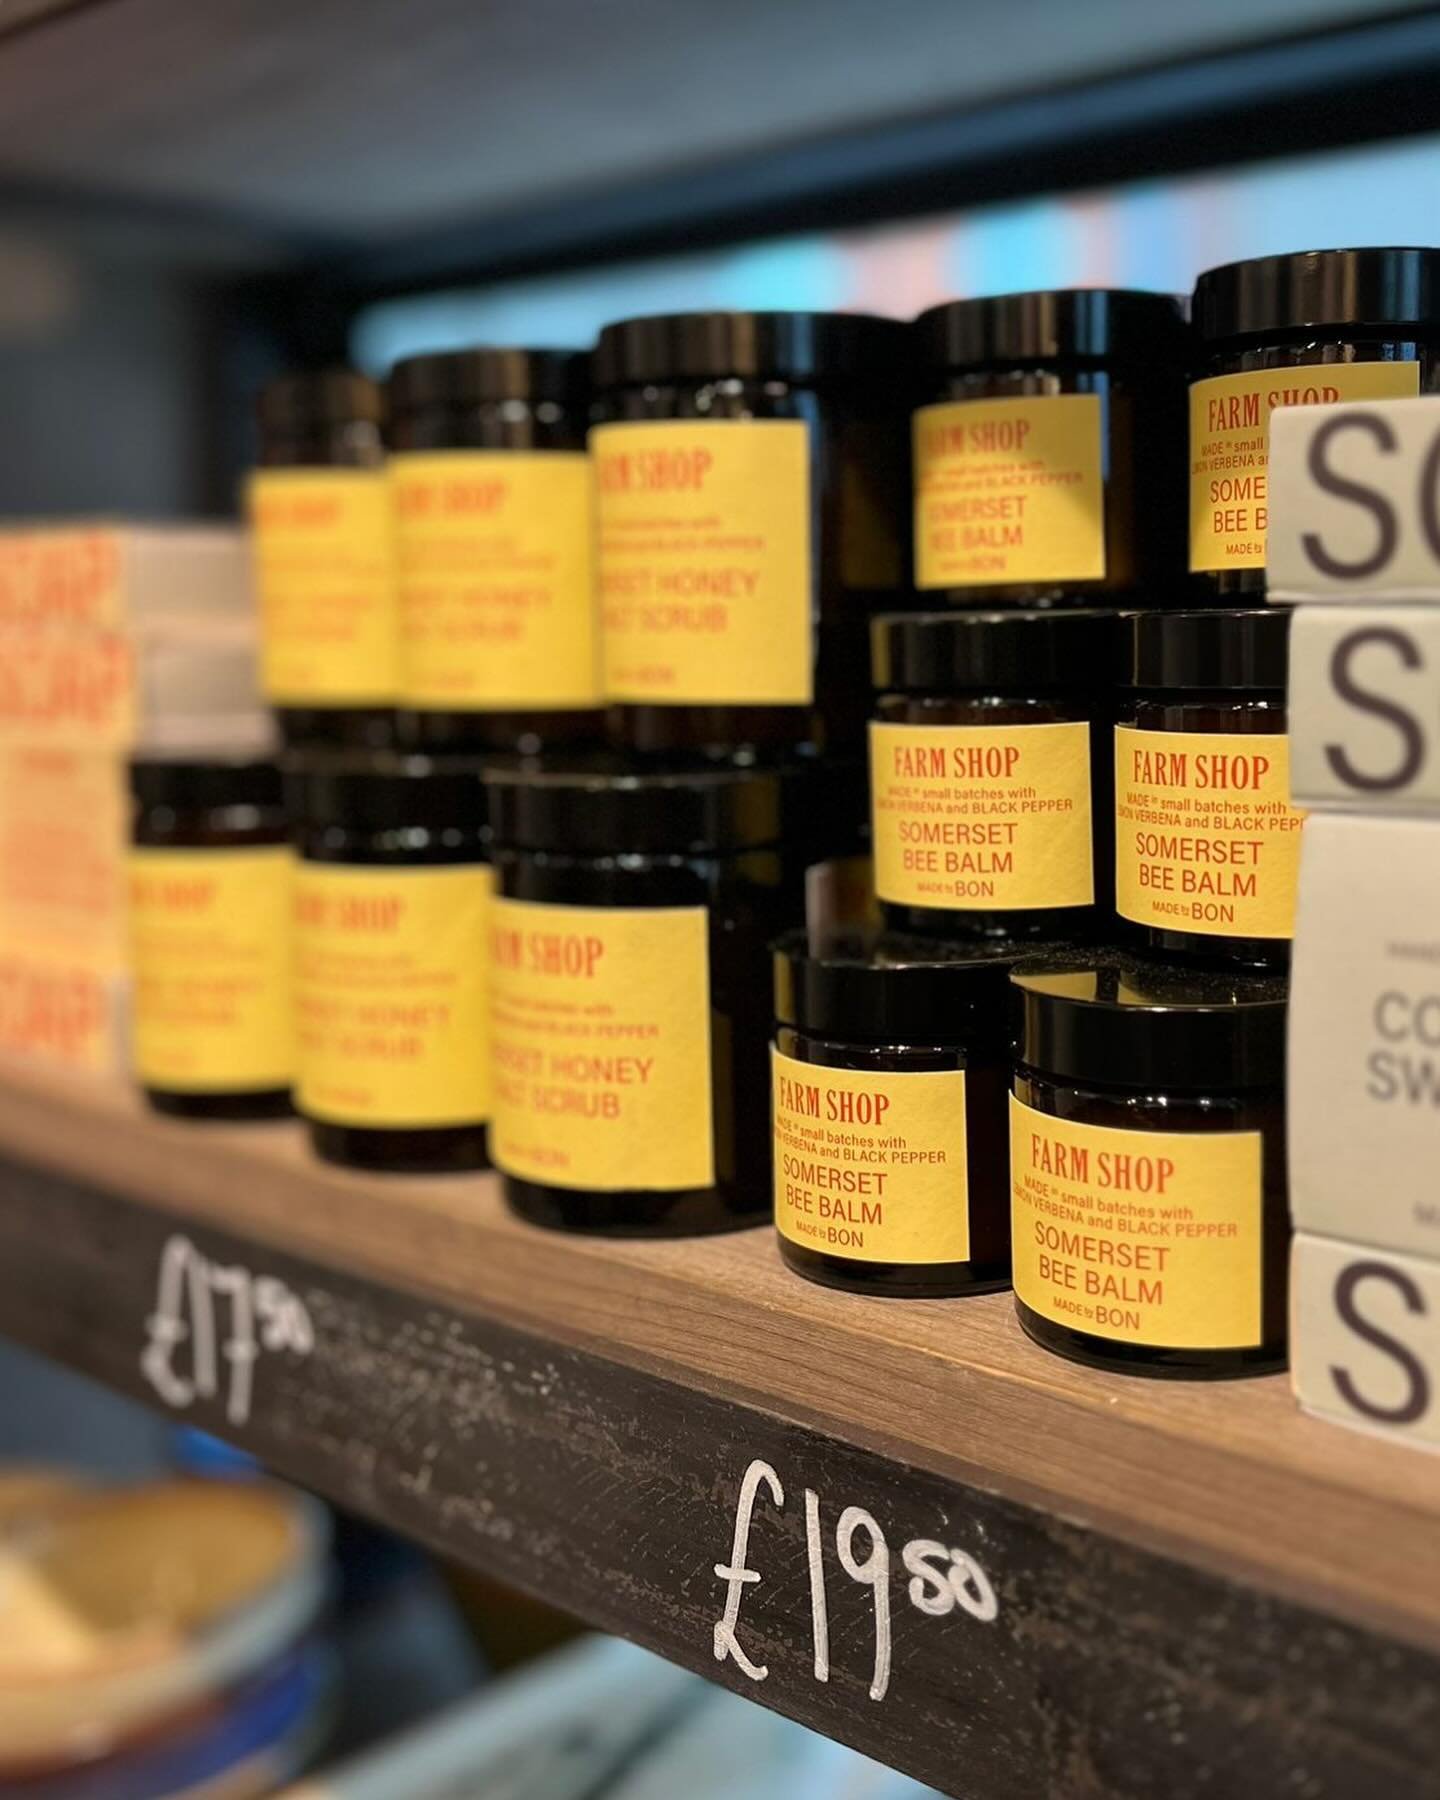 We&rsquo;re excited to be working on some new ranges for @farmshopuk. In the meantime you can buy our current range of Lemon Verbena &amp; Black Pepper Bee Balm and also Honey Salt Scrub at their @hauserwirthsomerset Farm Shop &amp; Mayfair stores as